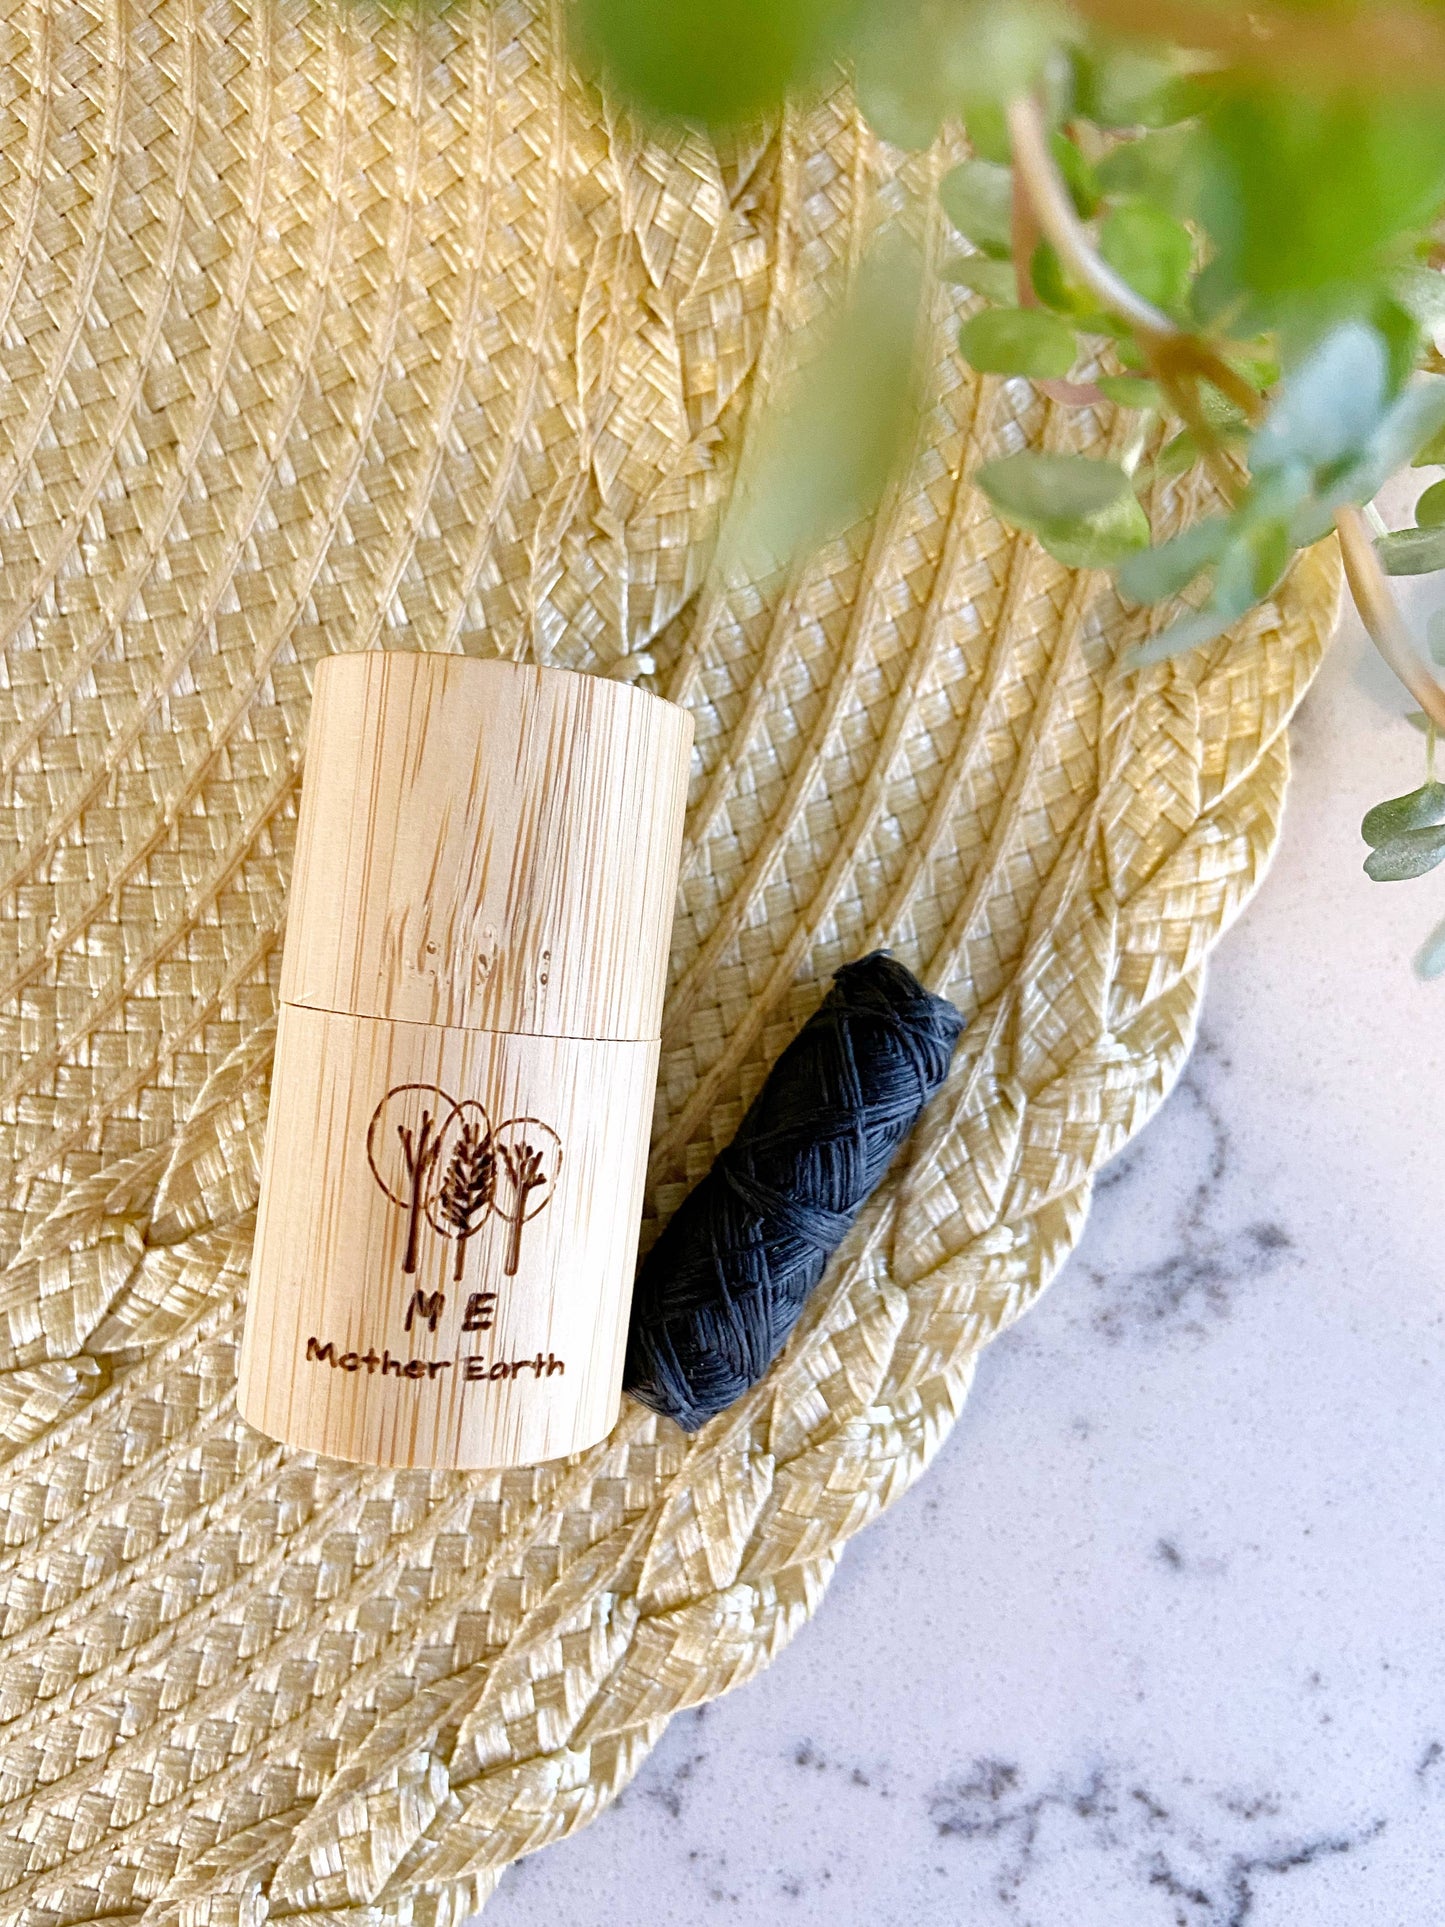 Me.Mother Earth - Vegan Eco Dental Floss- Refillable Bamboo Container